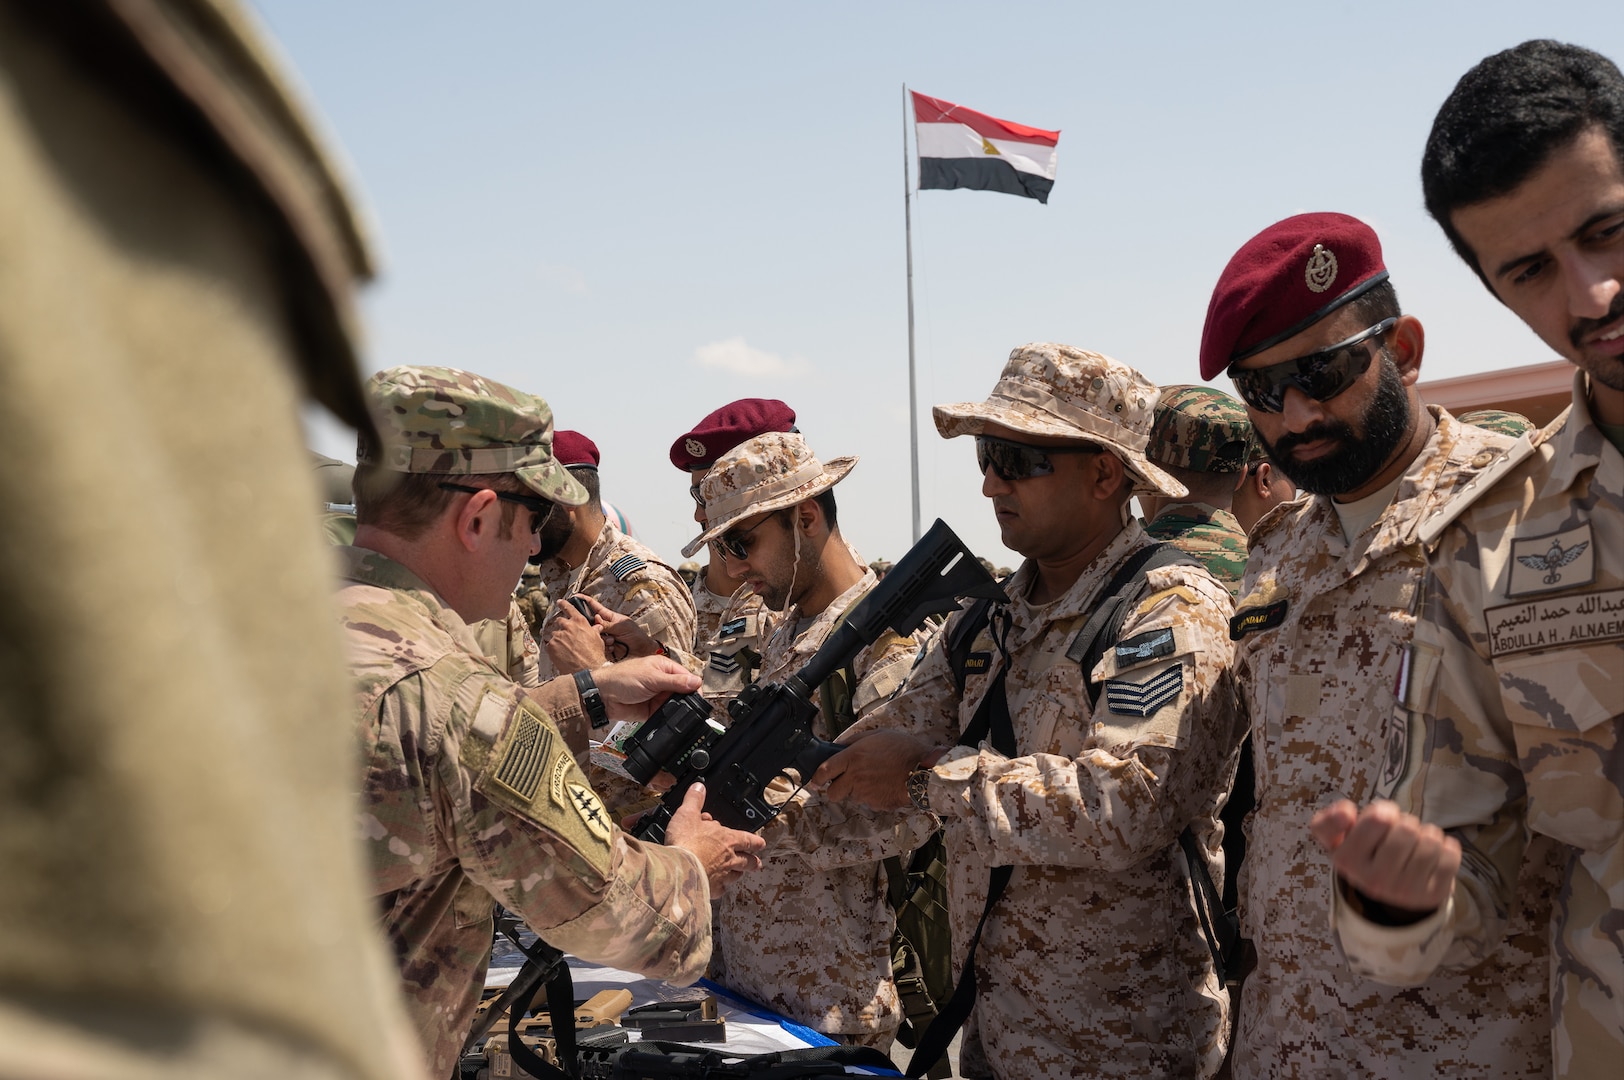 The participating forces attend the Bright Star 23 static display at Mohamed Naguib Military Base (MNMB), Egypt, Aug. 31, 2023. This static display allows the participating nations to interact with equipment and build a framework on how other nations use their equipment for defense in theater. Bright Star 2023 is a multilateral U.S. Central Command exercise held with the Arab Republic of Egypt across air, land, and sea domains that promotes and enhances regional security and cooperation, and improves interoperability in irregular warfare against hybrid threat scenarios. (U.S. Army Photo by Sgt. Amber Cobena)